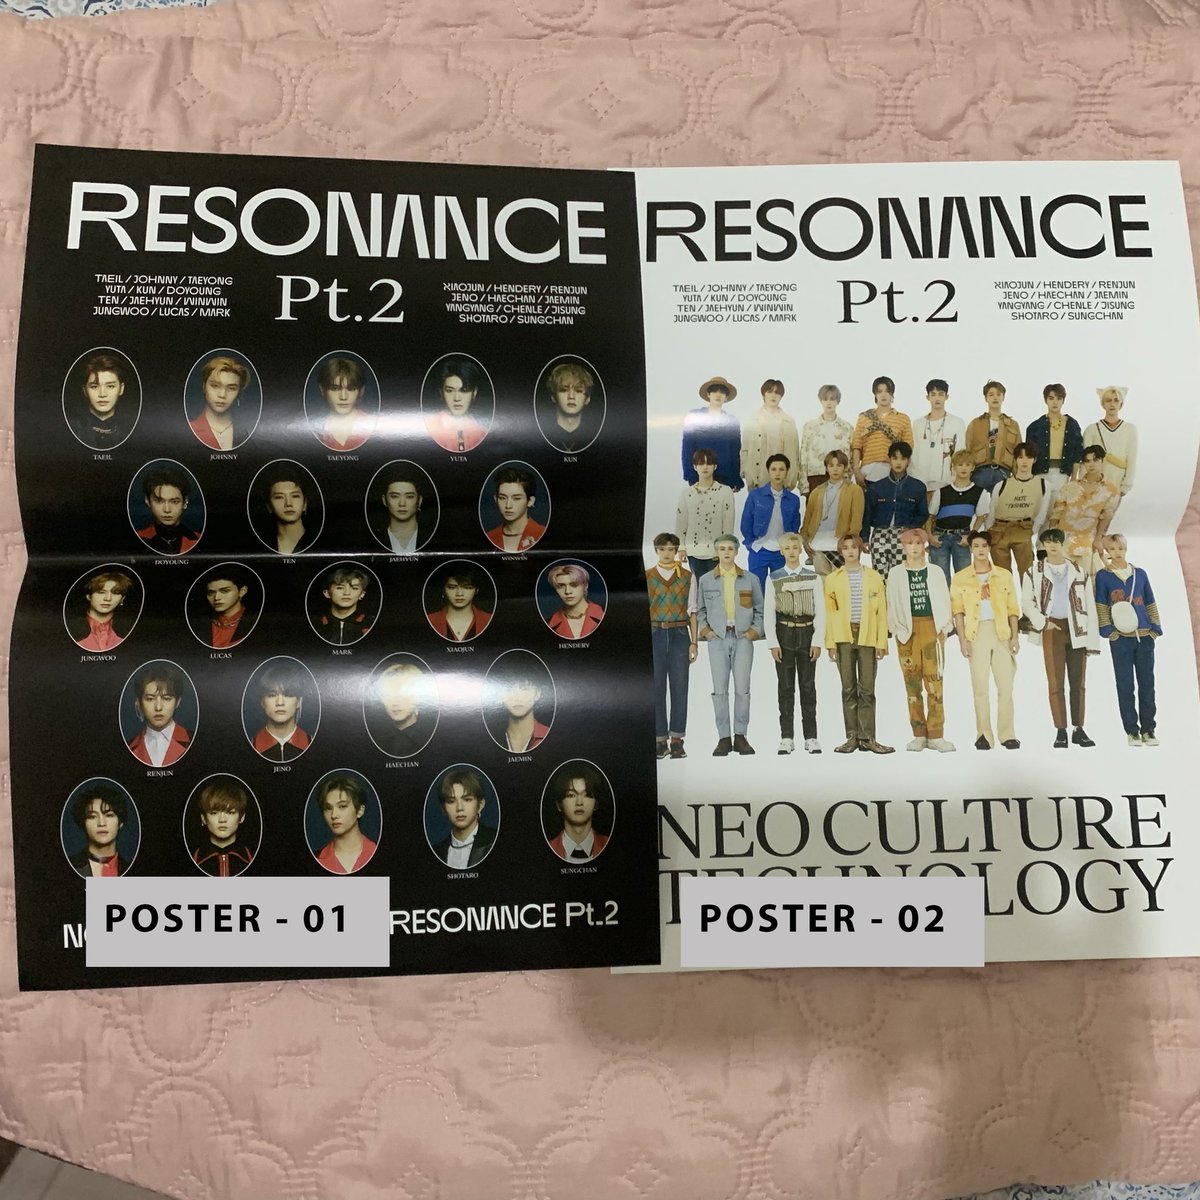 wts lfb ph on hand nct yearbook card ybc id card poster resonance chenle hendery nct 2020Pricelist on the last photo 